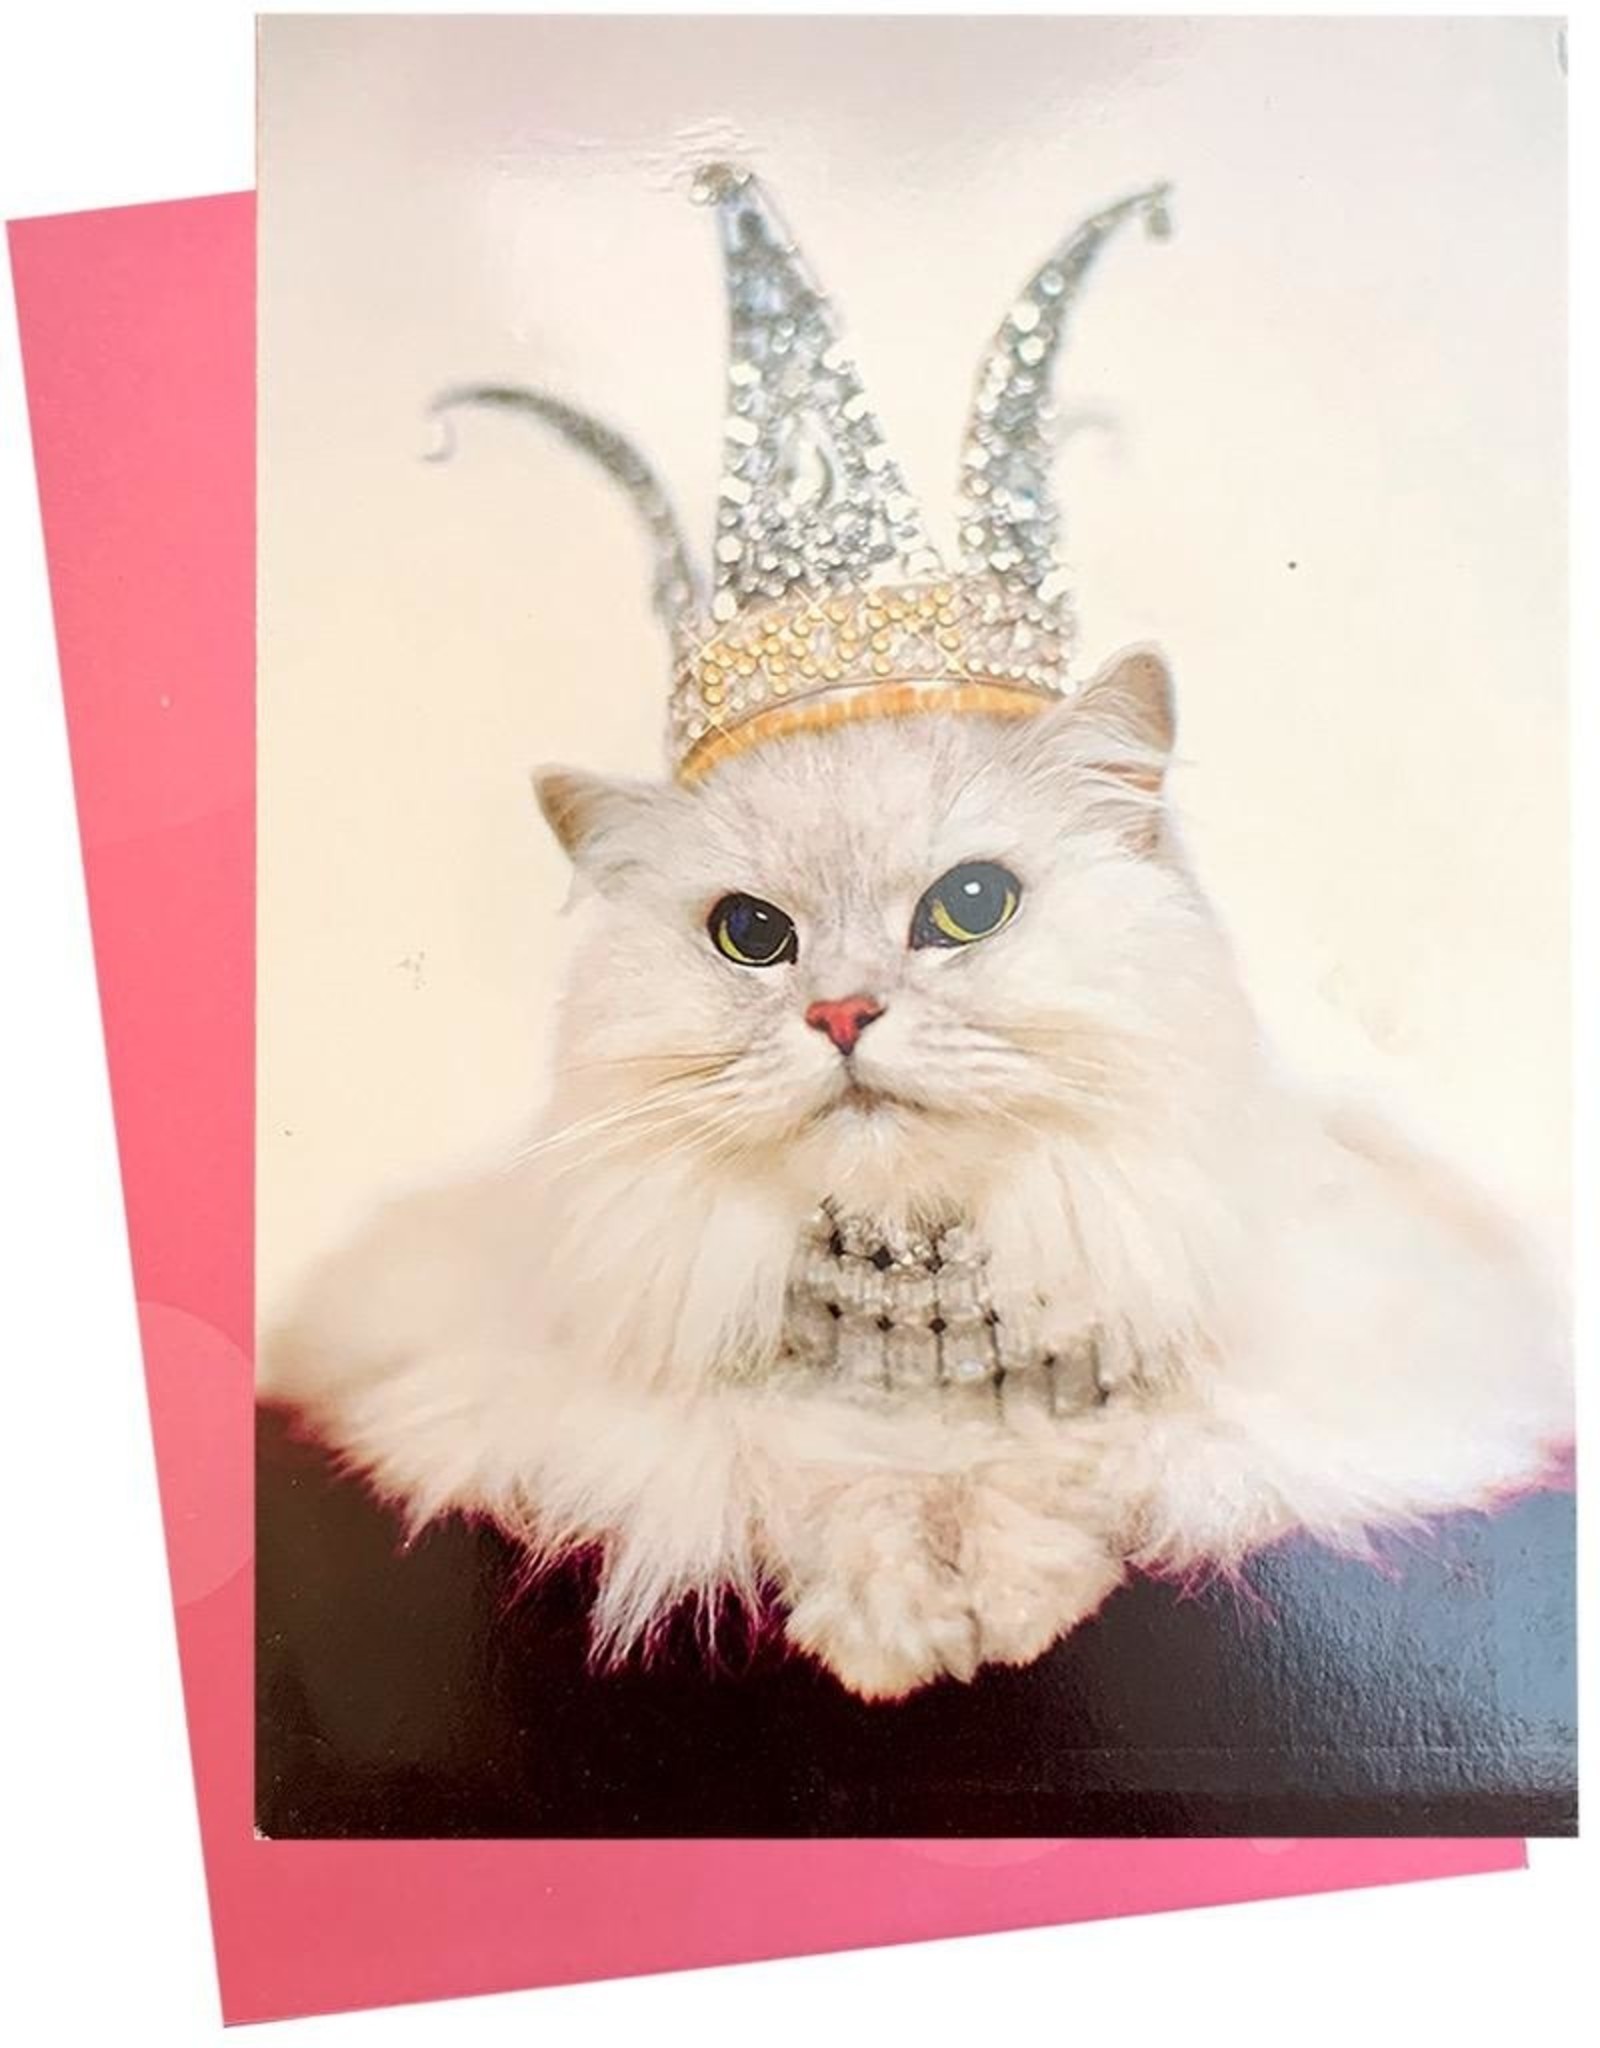 Avanti Mothers Day Card Mom Rules Cat Wearing Mom Crown